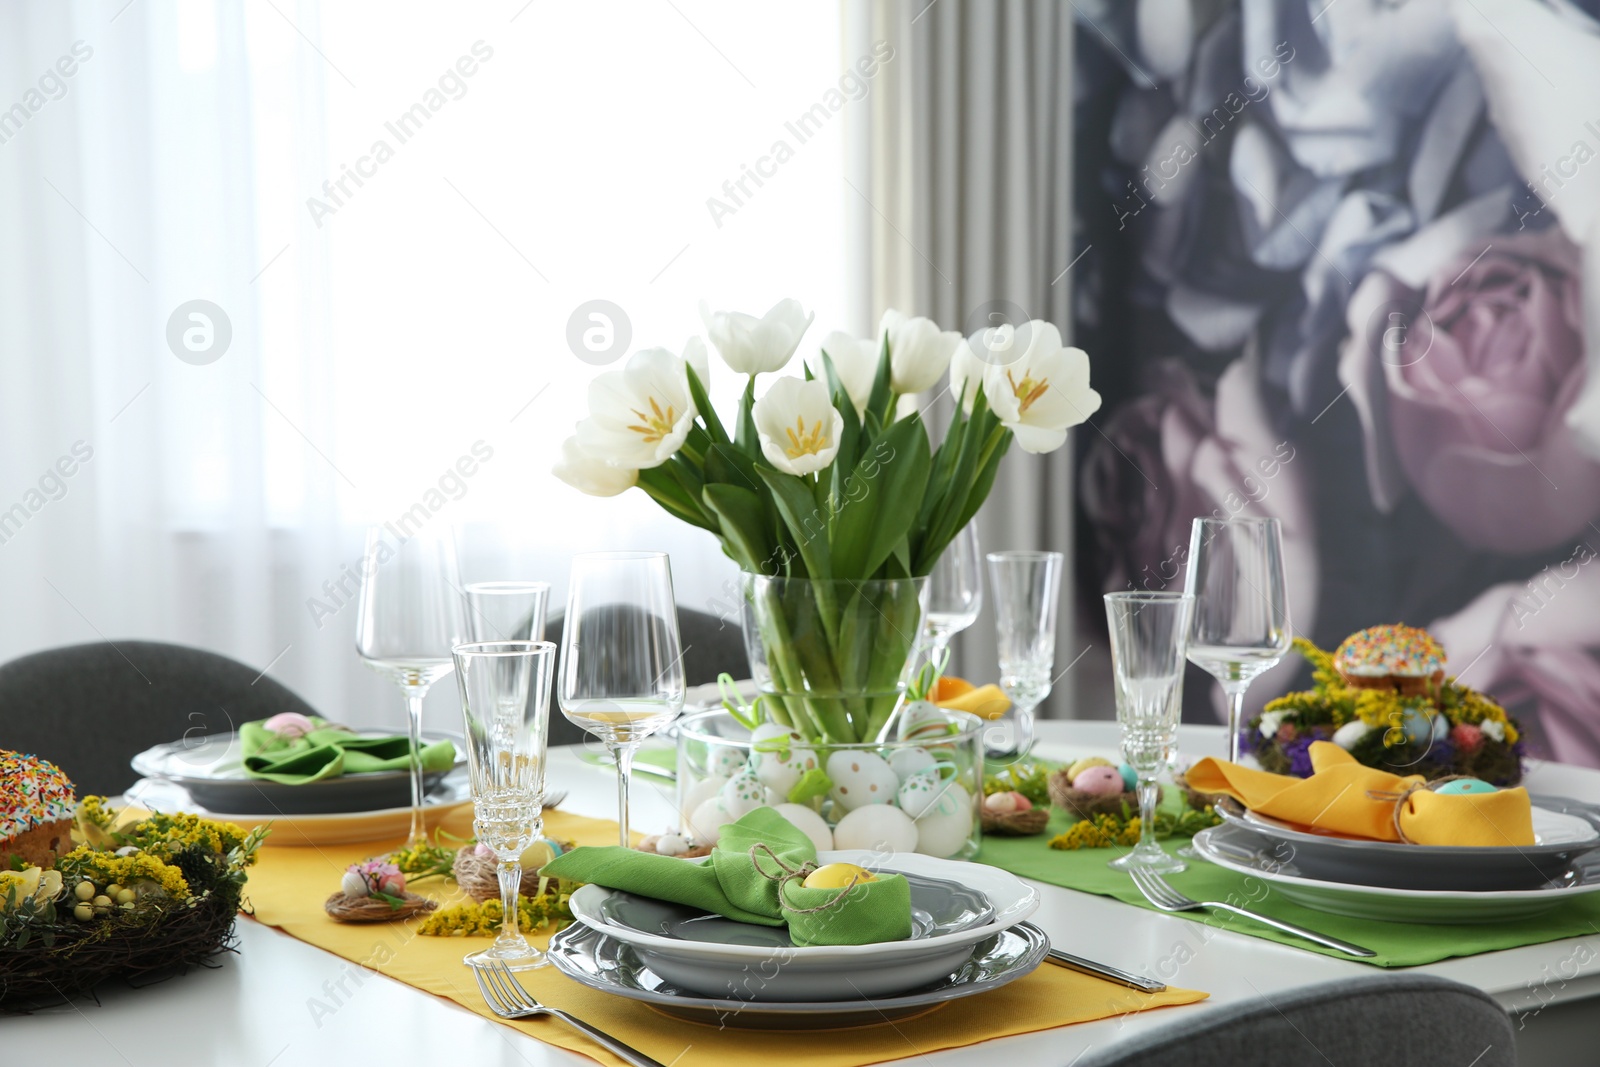 Photo of Festive Easter table setting with beautiful white tulips and eggs indoors